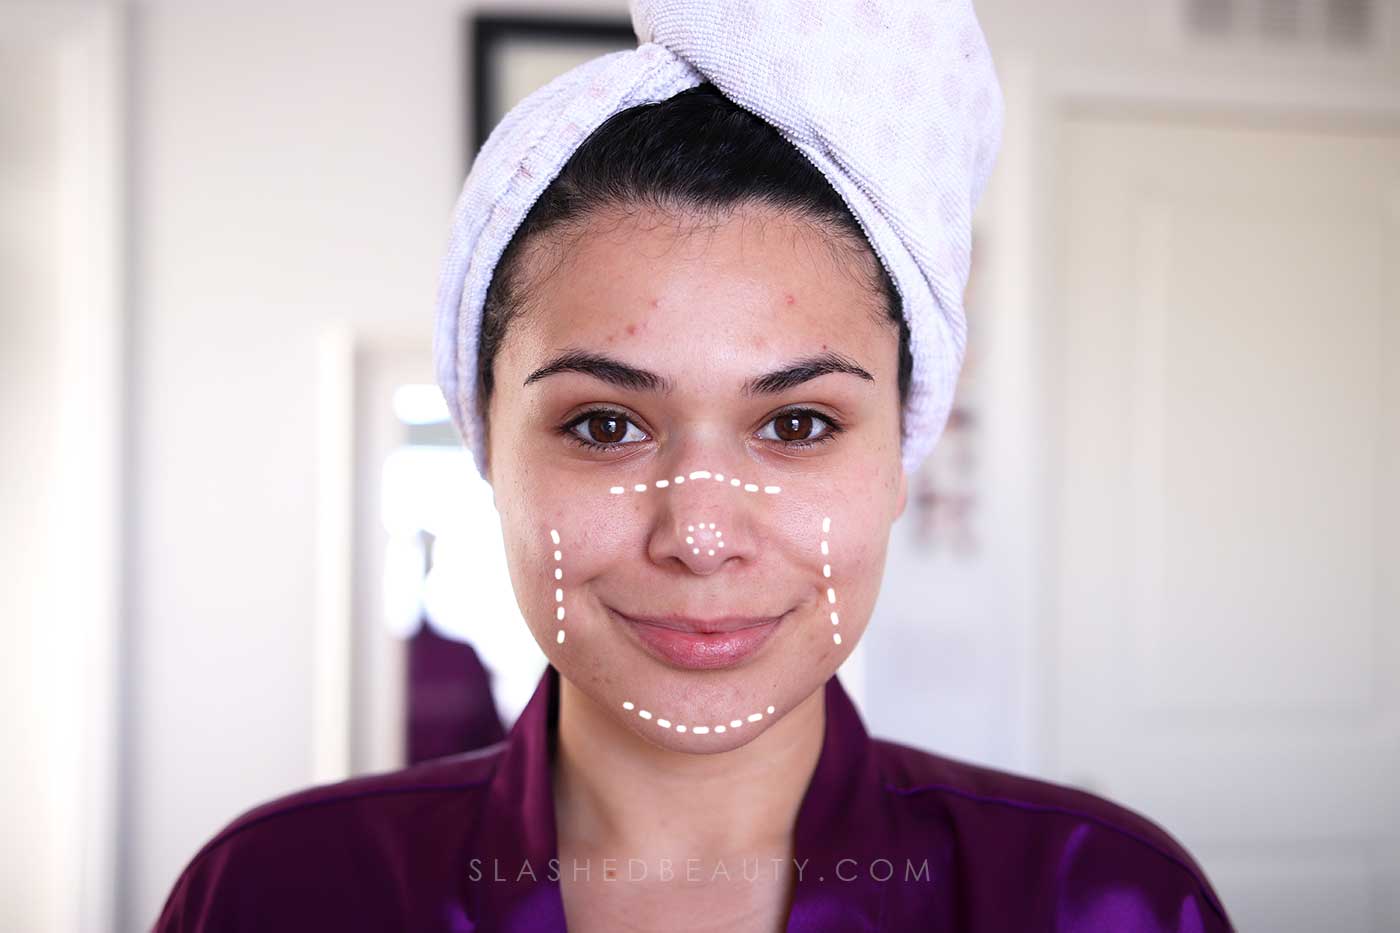 Face Mask Makeup Tip: Apply less foundation where the face mask touches your face. | How to Keep Makeup On Under a Face Mask | Slashed Beauty